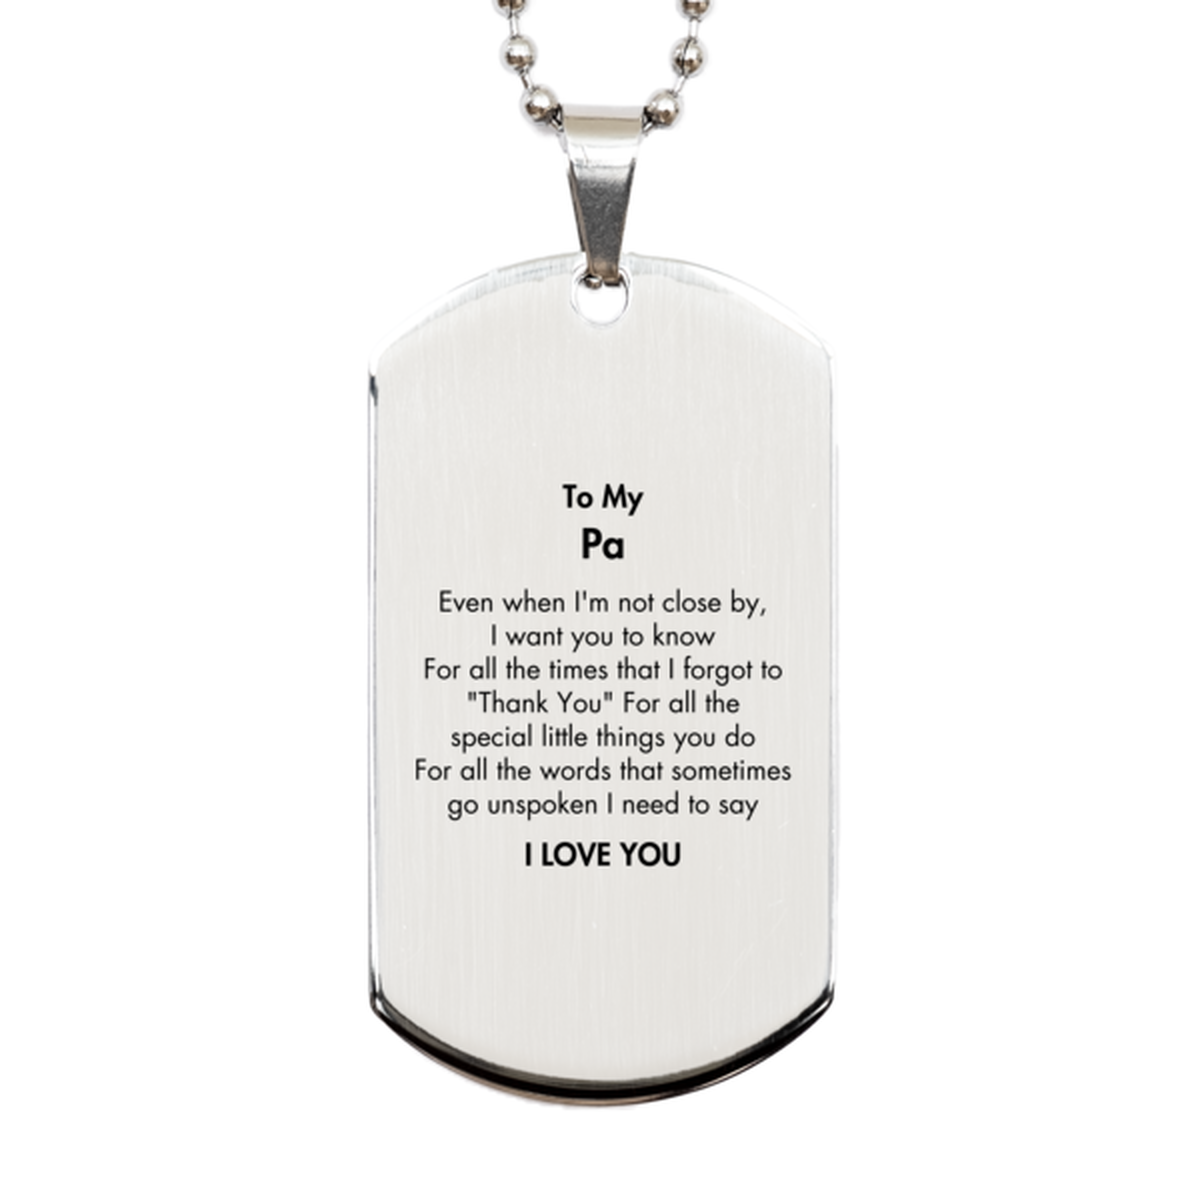 Thank You Gifts for Pa, Keepsake Silver Dog Tag Gifts for Pa Birthday Mother's day Father's Day Pa For all the words That sometimes go unspoken I need to say I LOVE YOU